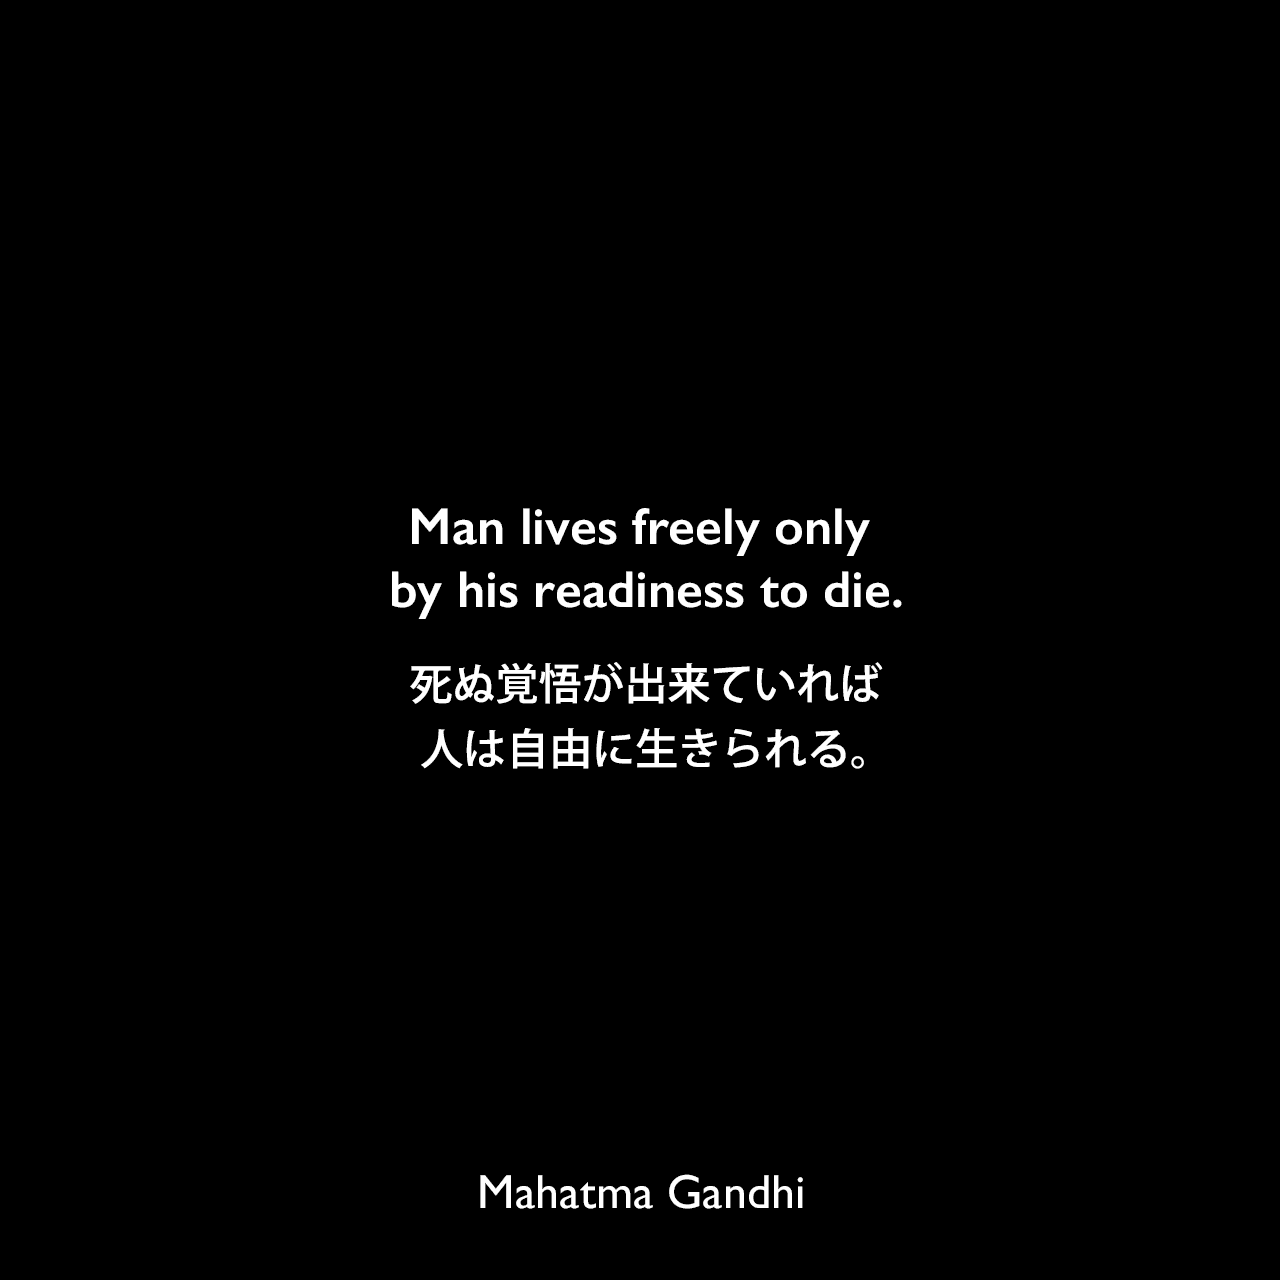 Man lives freely only by his readiness to die.死ぬ覚悟が出来ていれば、人は自由に生きられる。Mahatma Gandhi